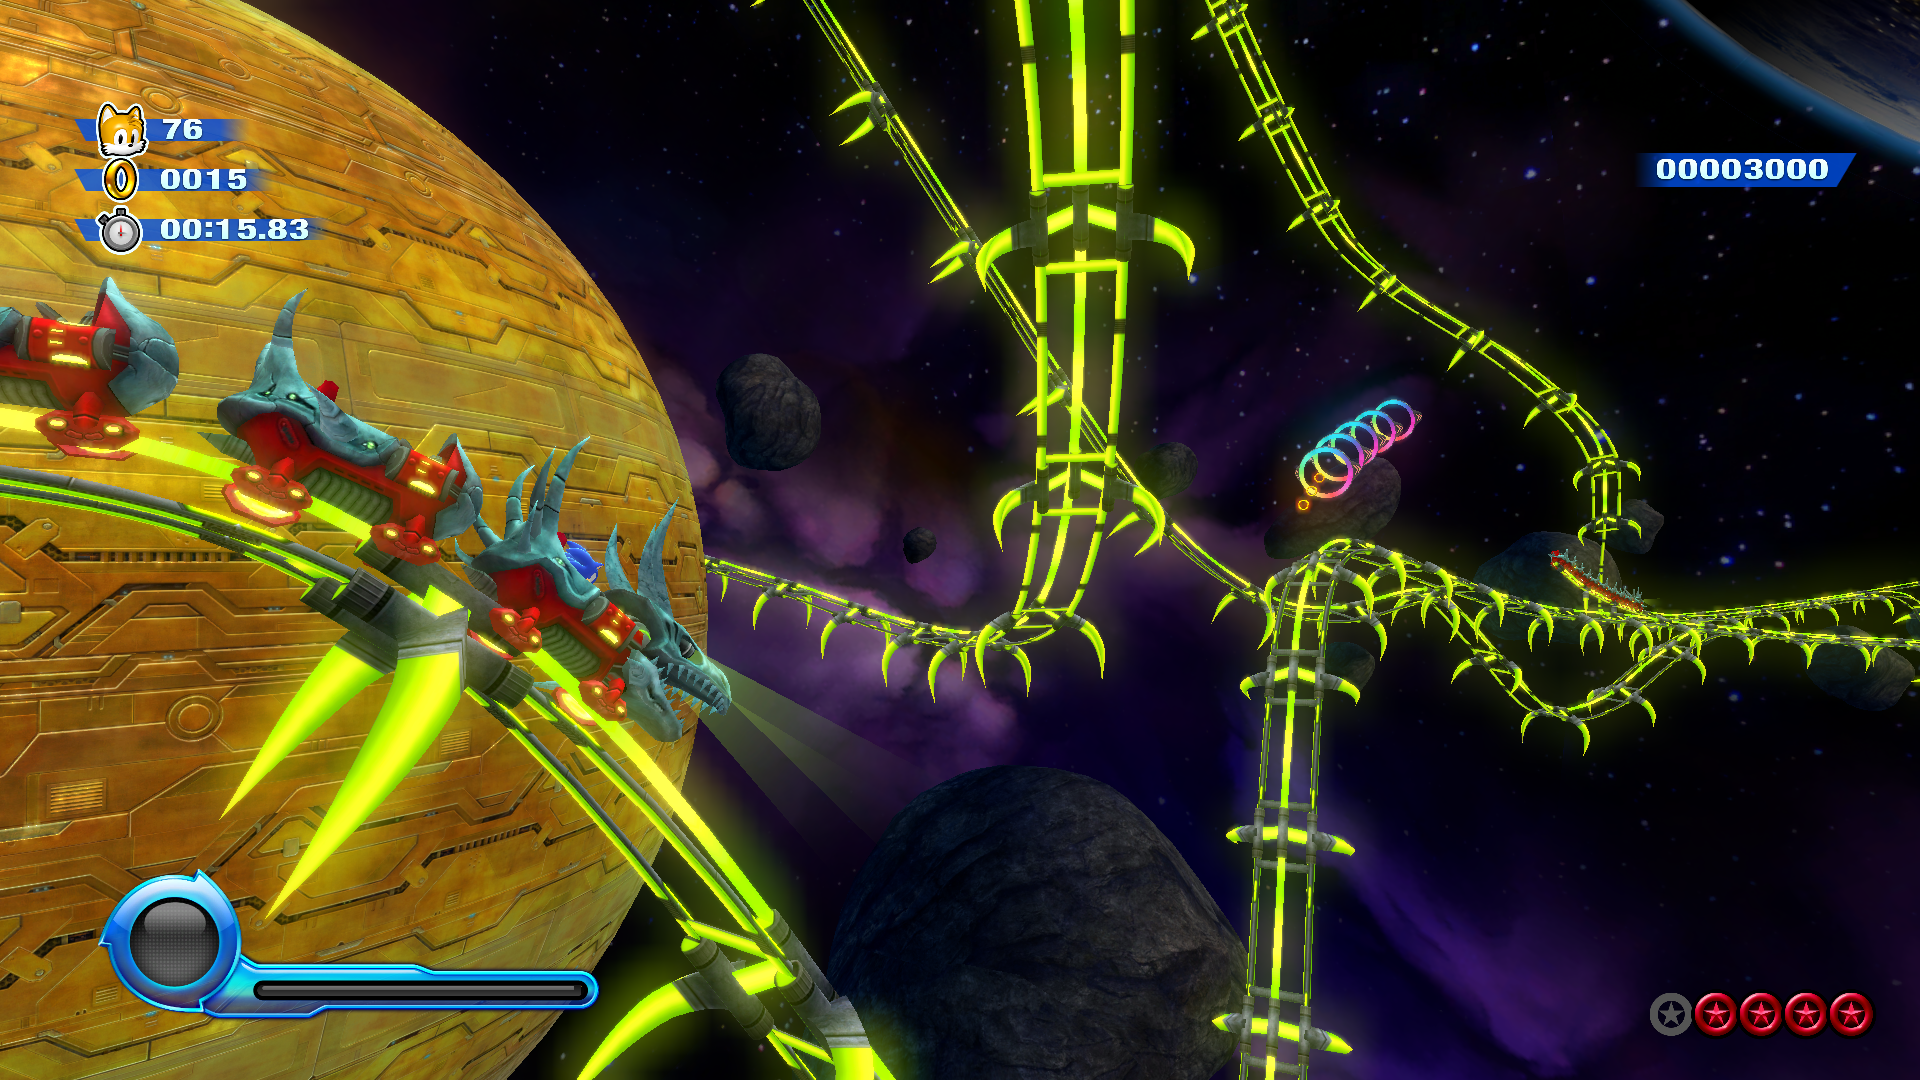 Sonic Colors Ultimate Review Scores Round-up – SoaH City